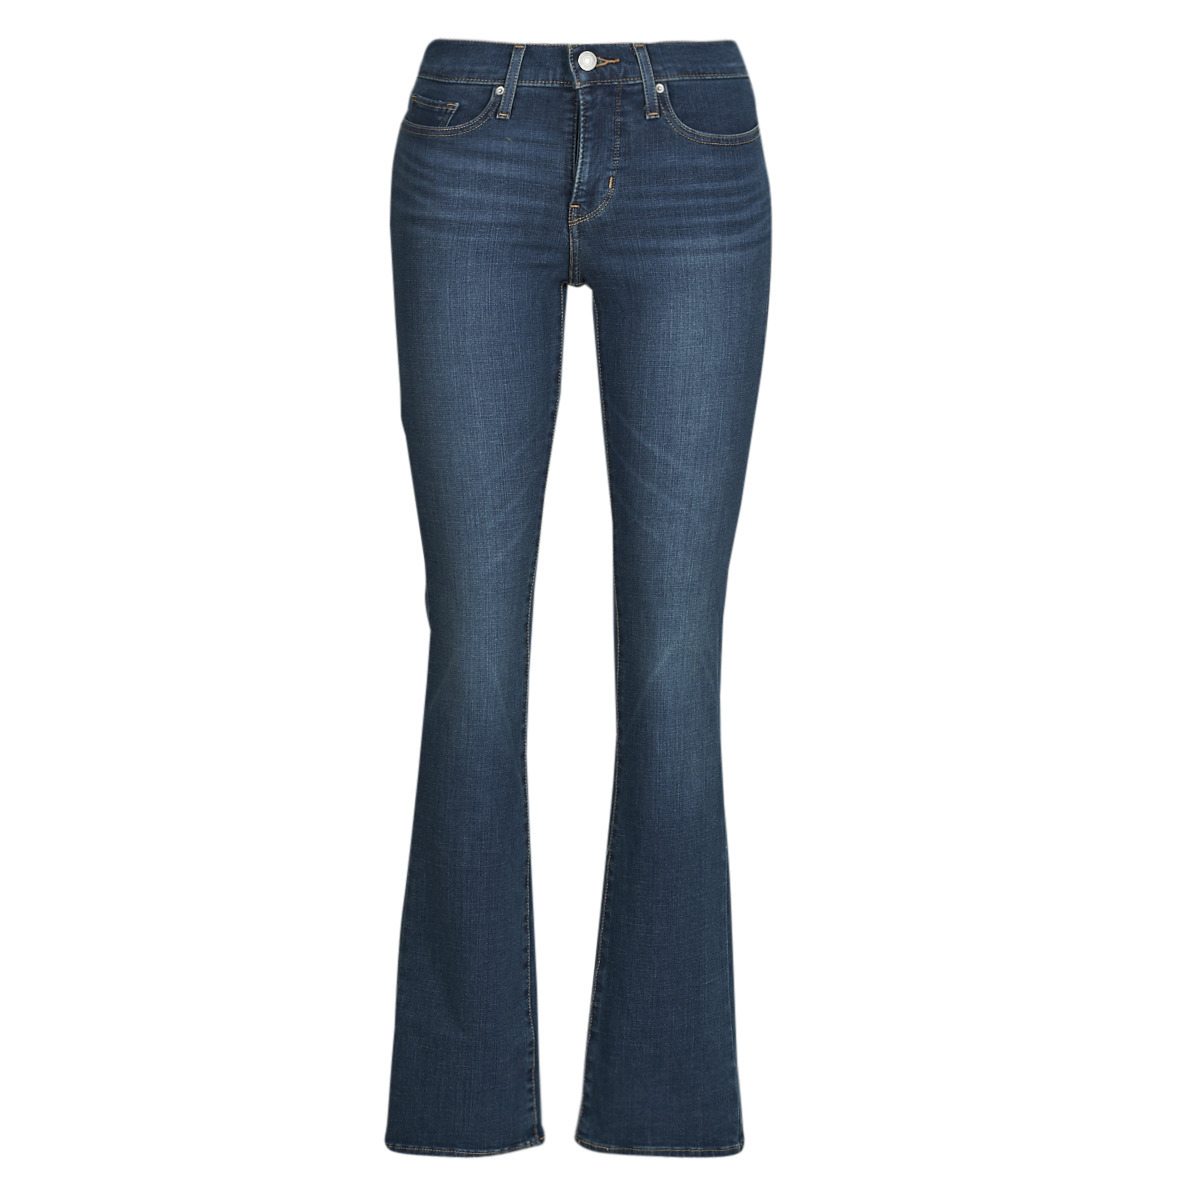 Levi's - Woman Bootcut Jeans Blue at Spartoo GOOFASH